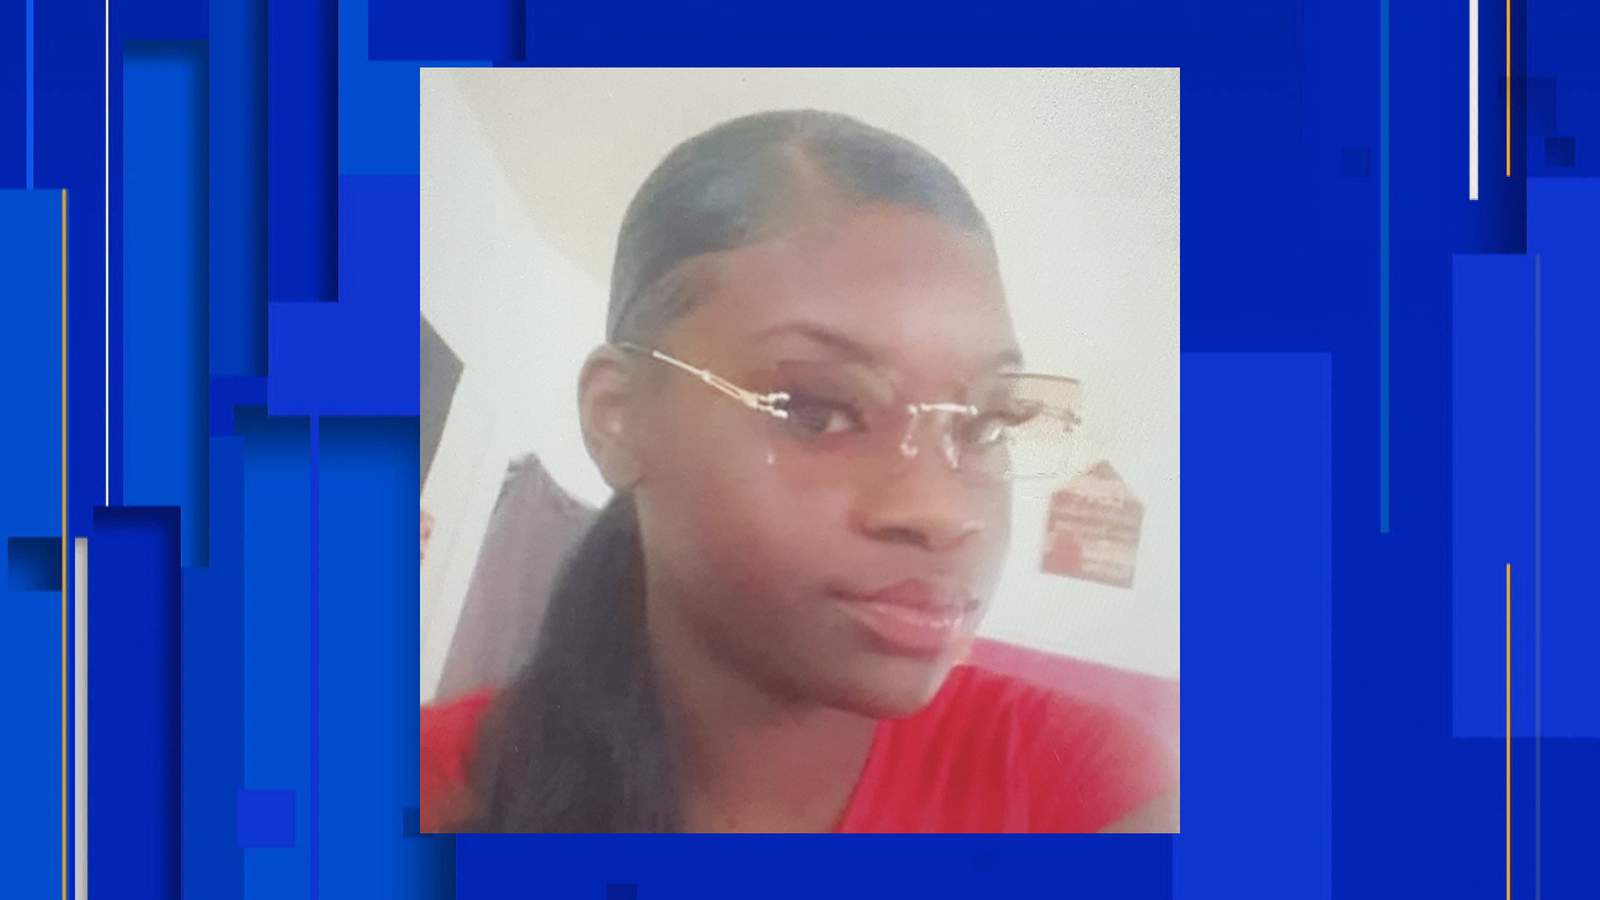 Detroit police searching for 16-year-old missing for over a week